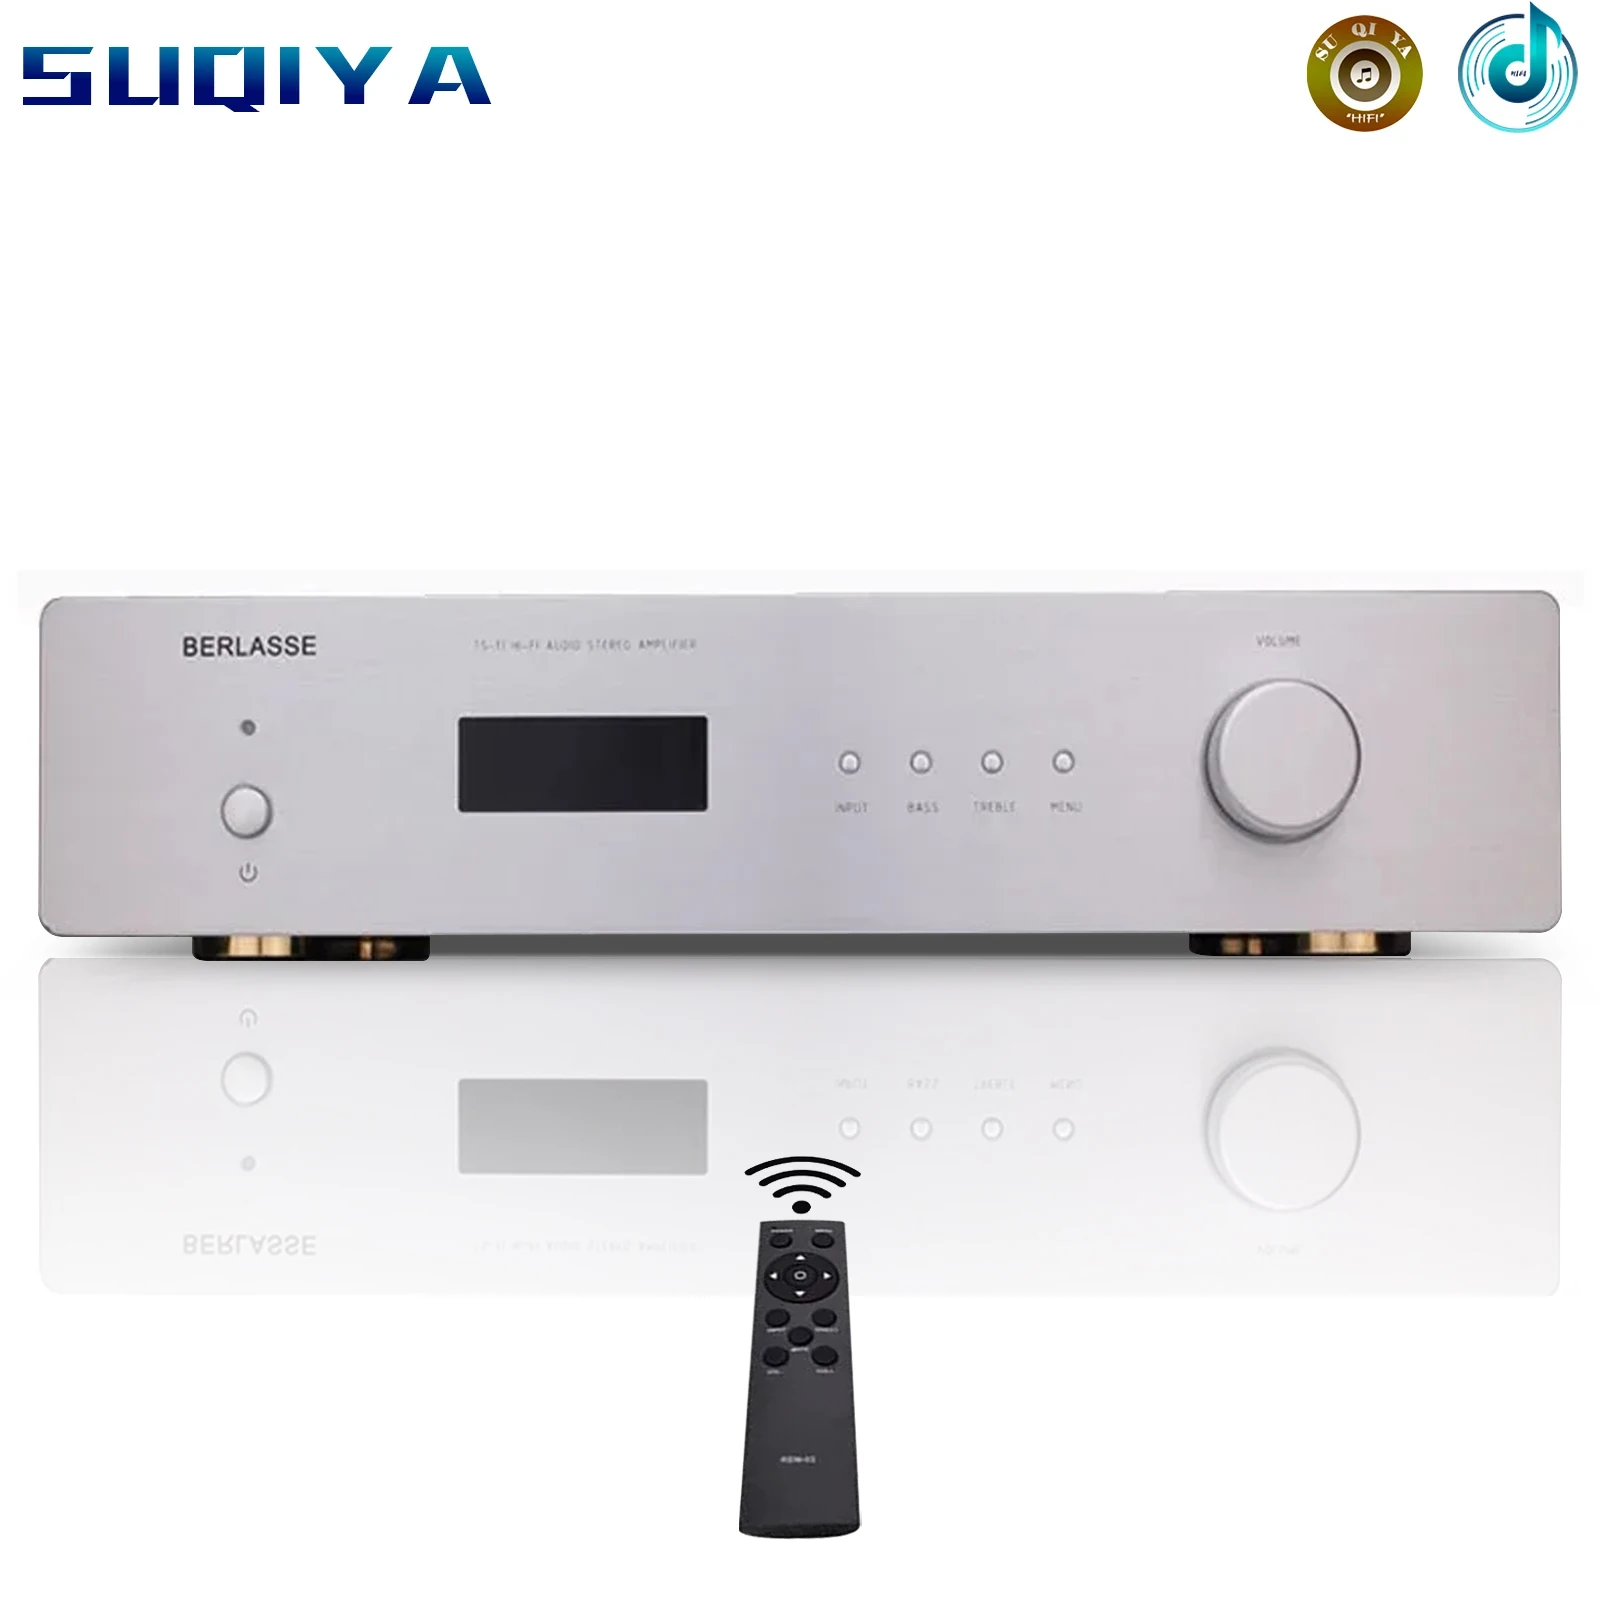 

120w*2 2-channel Stereo Amplifier High Power Supports Bluetooth 5.0 Fiber Coaxial Input JRC5532 HIFI Subwoofer Amplifier Audio